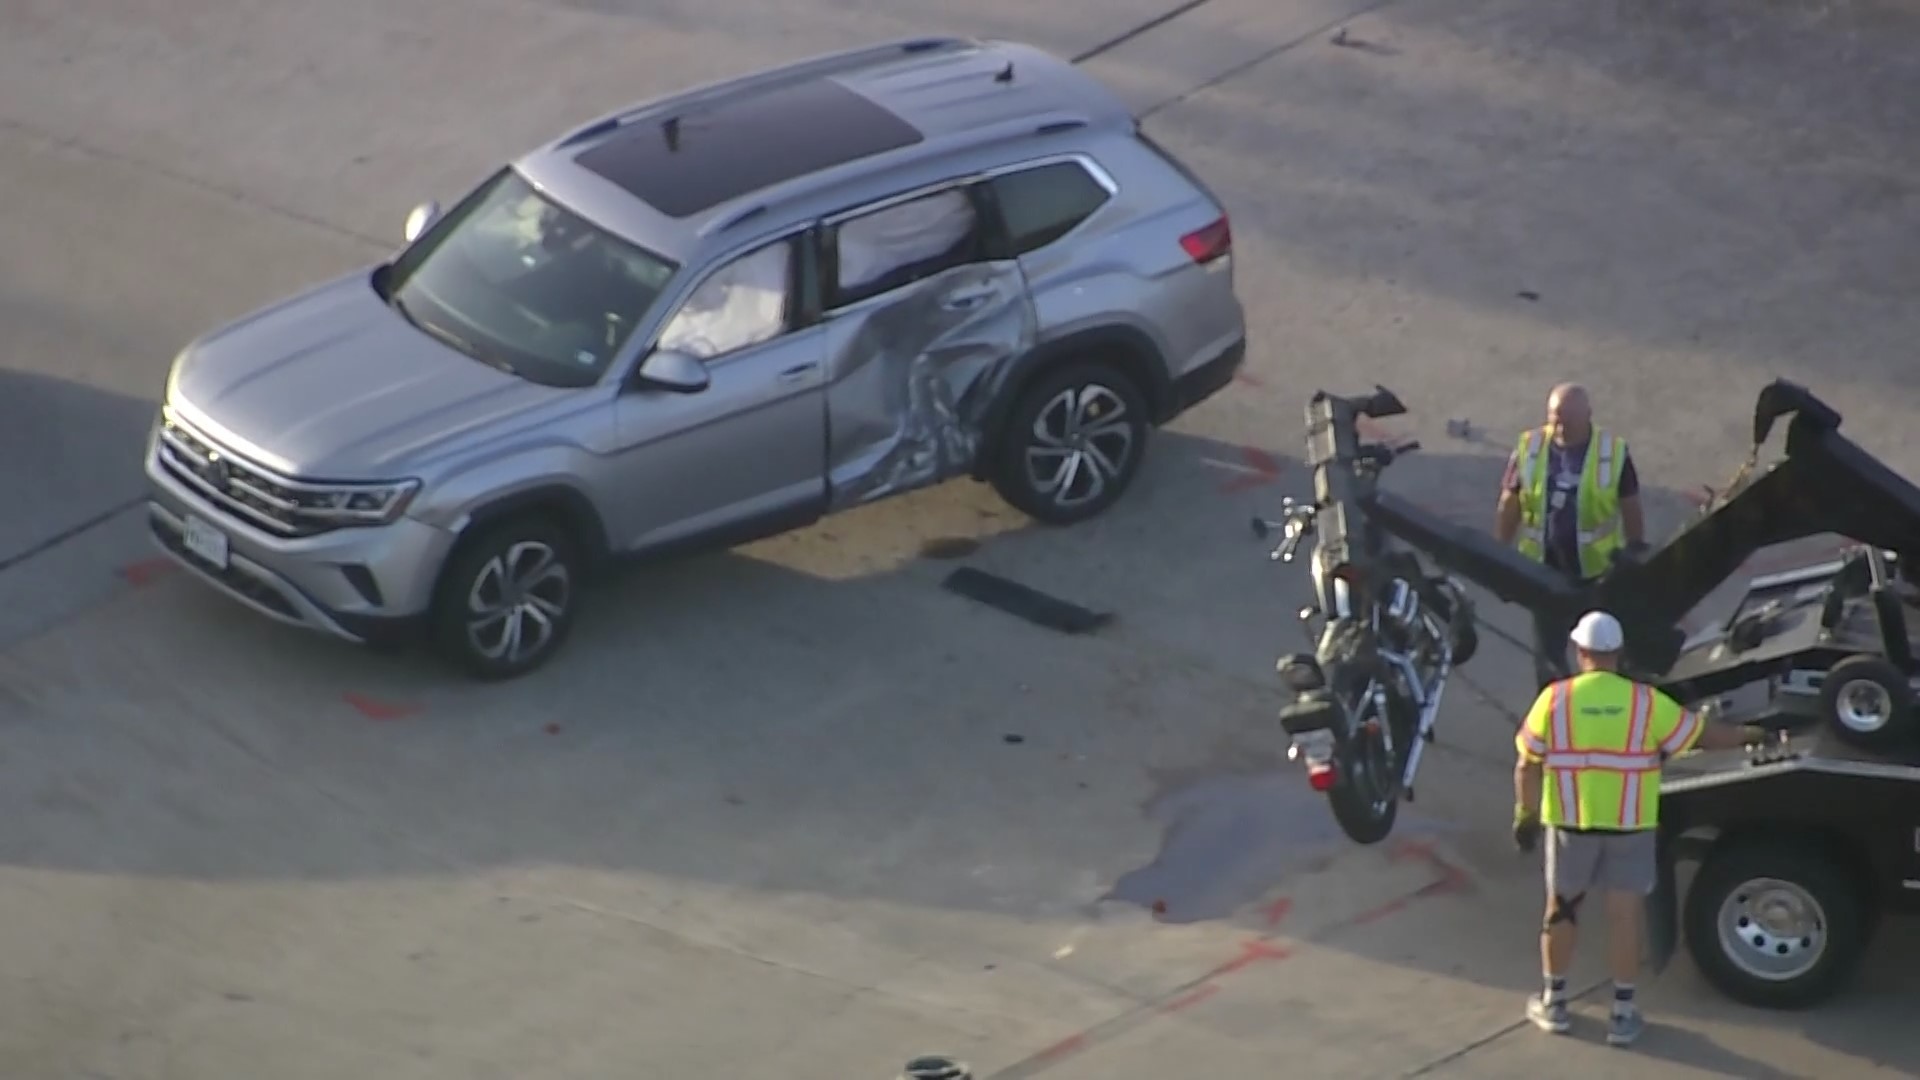 Life Flight was called to the scene of a major crash involving a motorcycle and another car near a Katy ISD campus, according to Harris County Sheriff Ed Gonzalez.